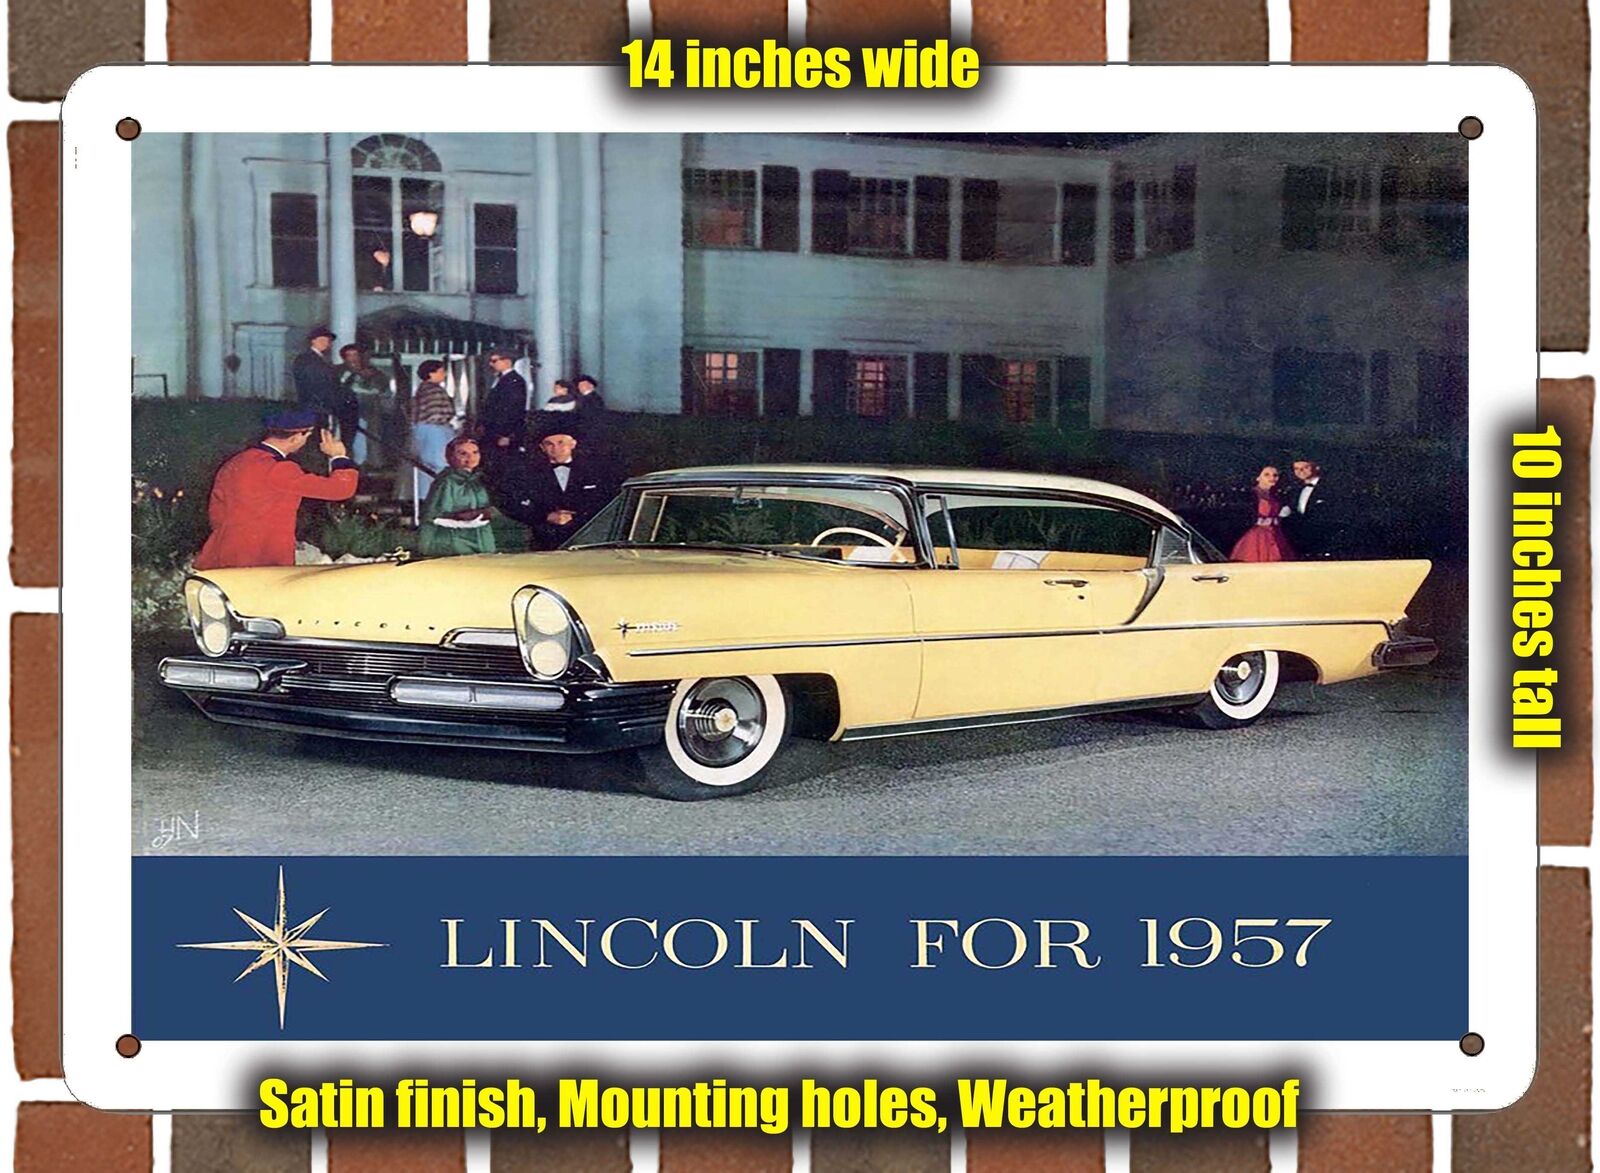 METAL SIGN - 1957 Lincoln